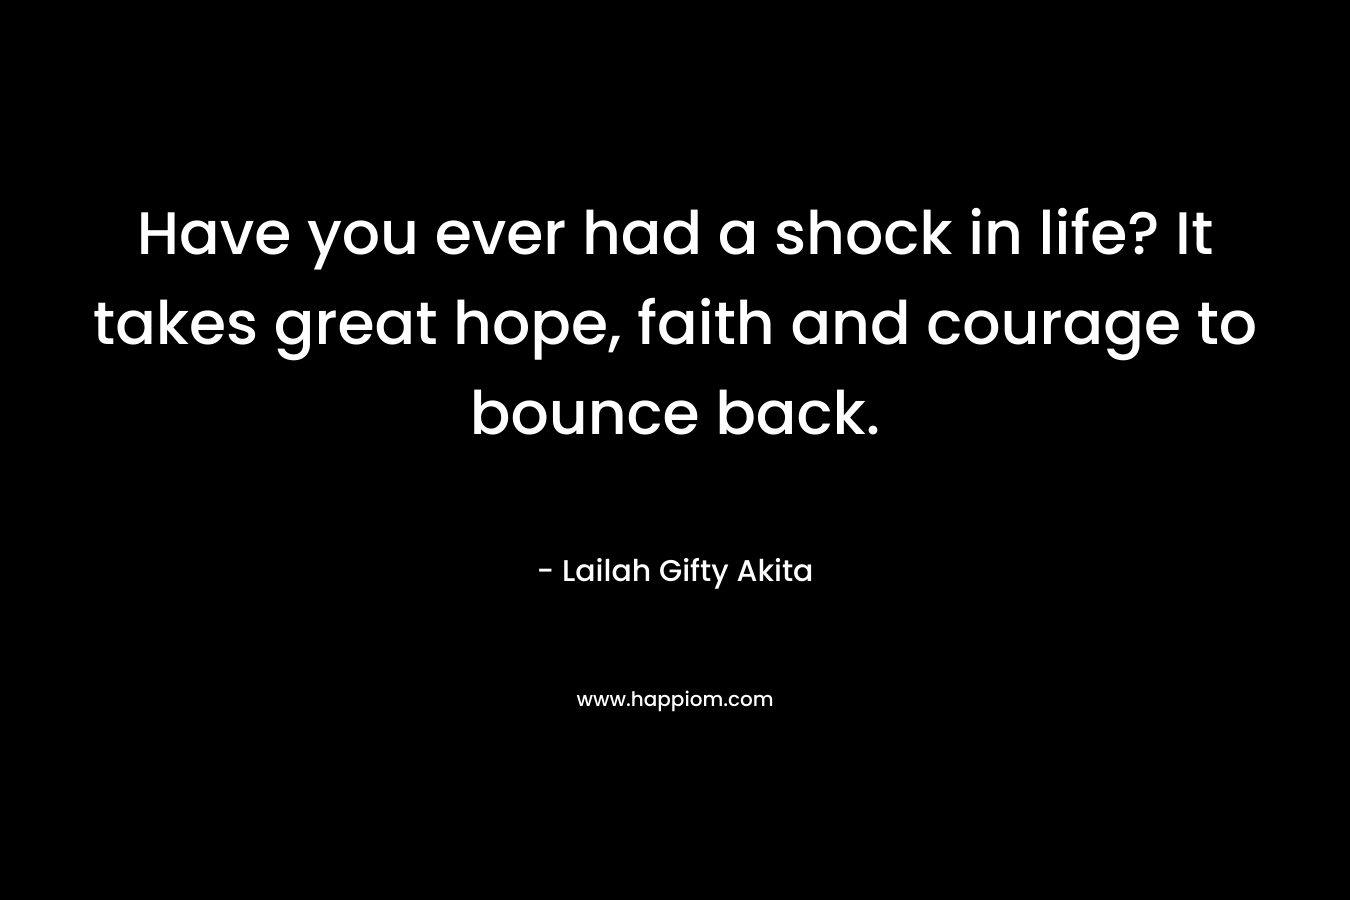 Have you ever had a shock in life? It takes great hope, faith and courage to bounce back.